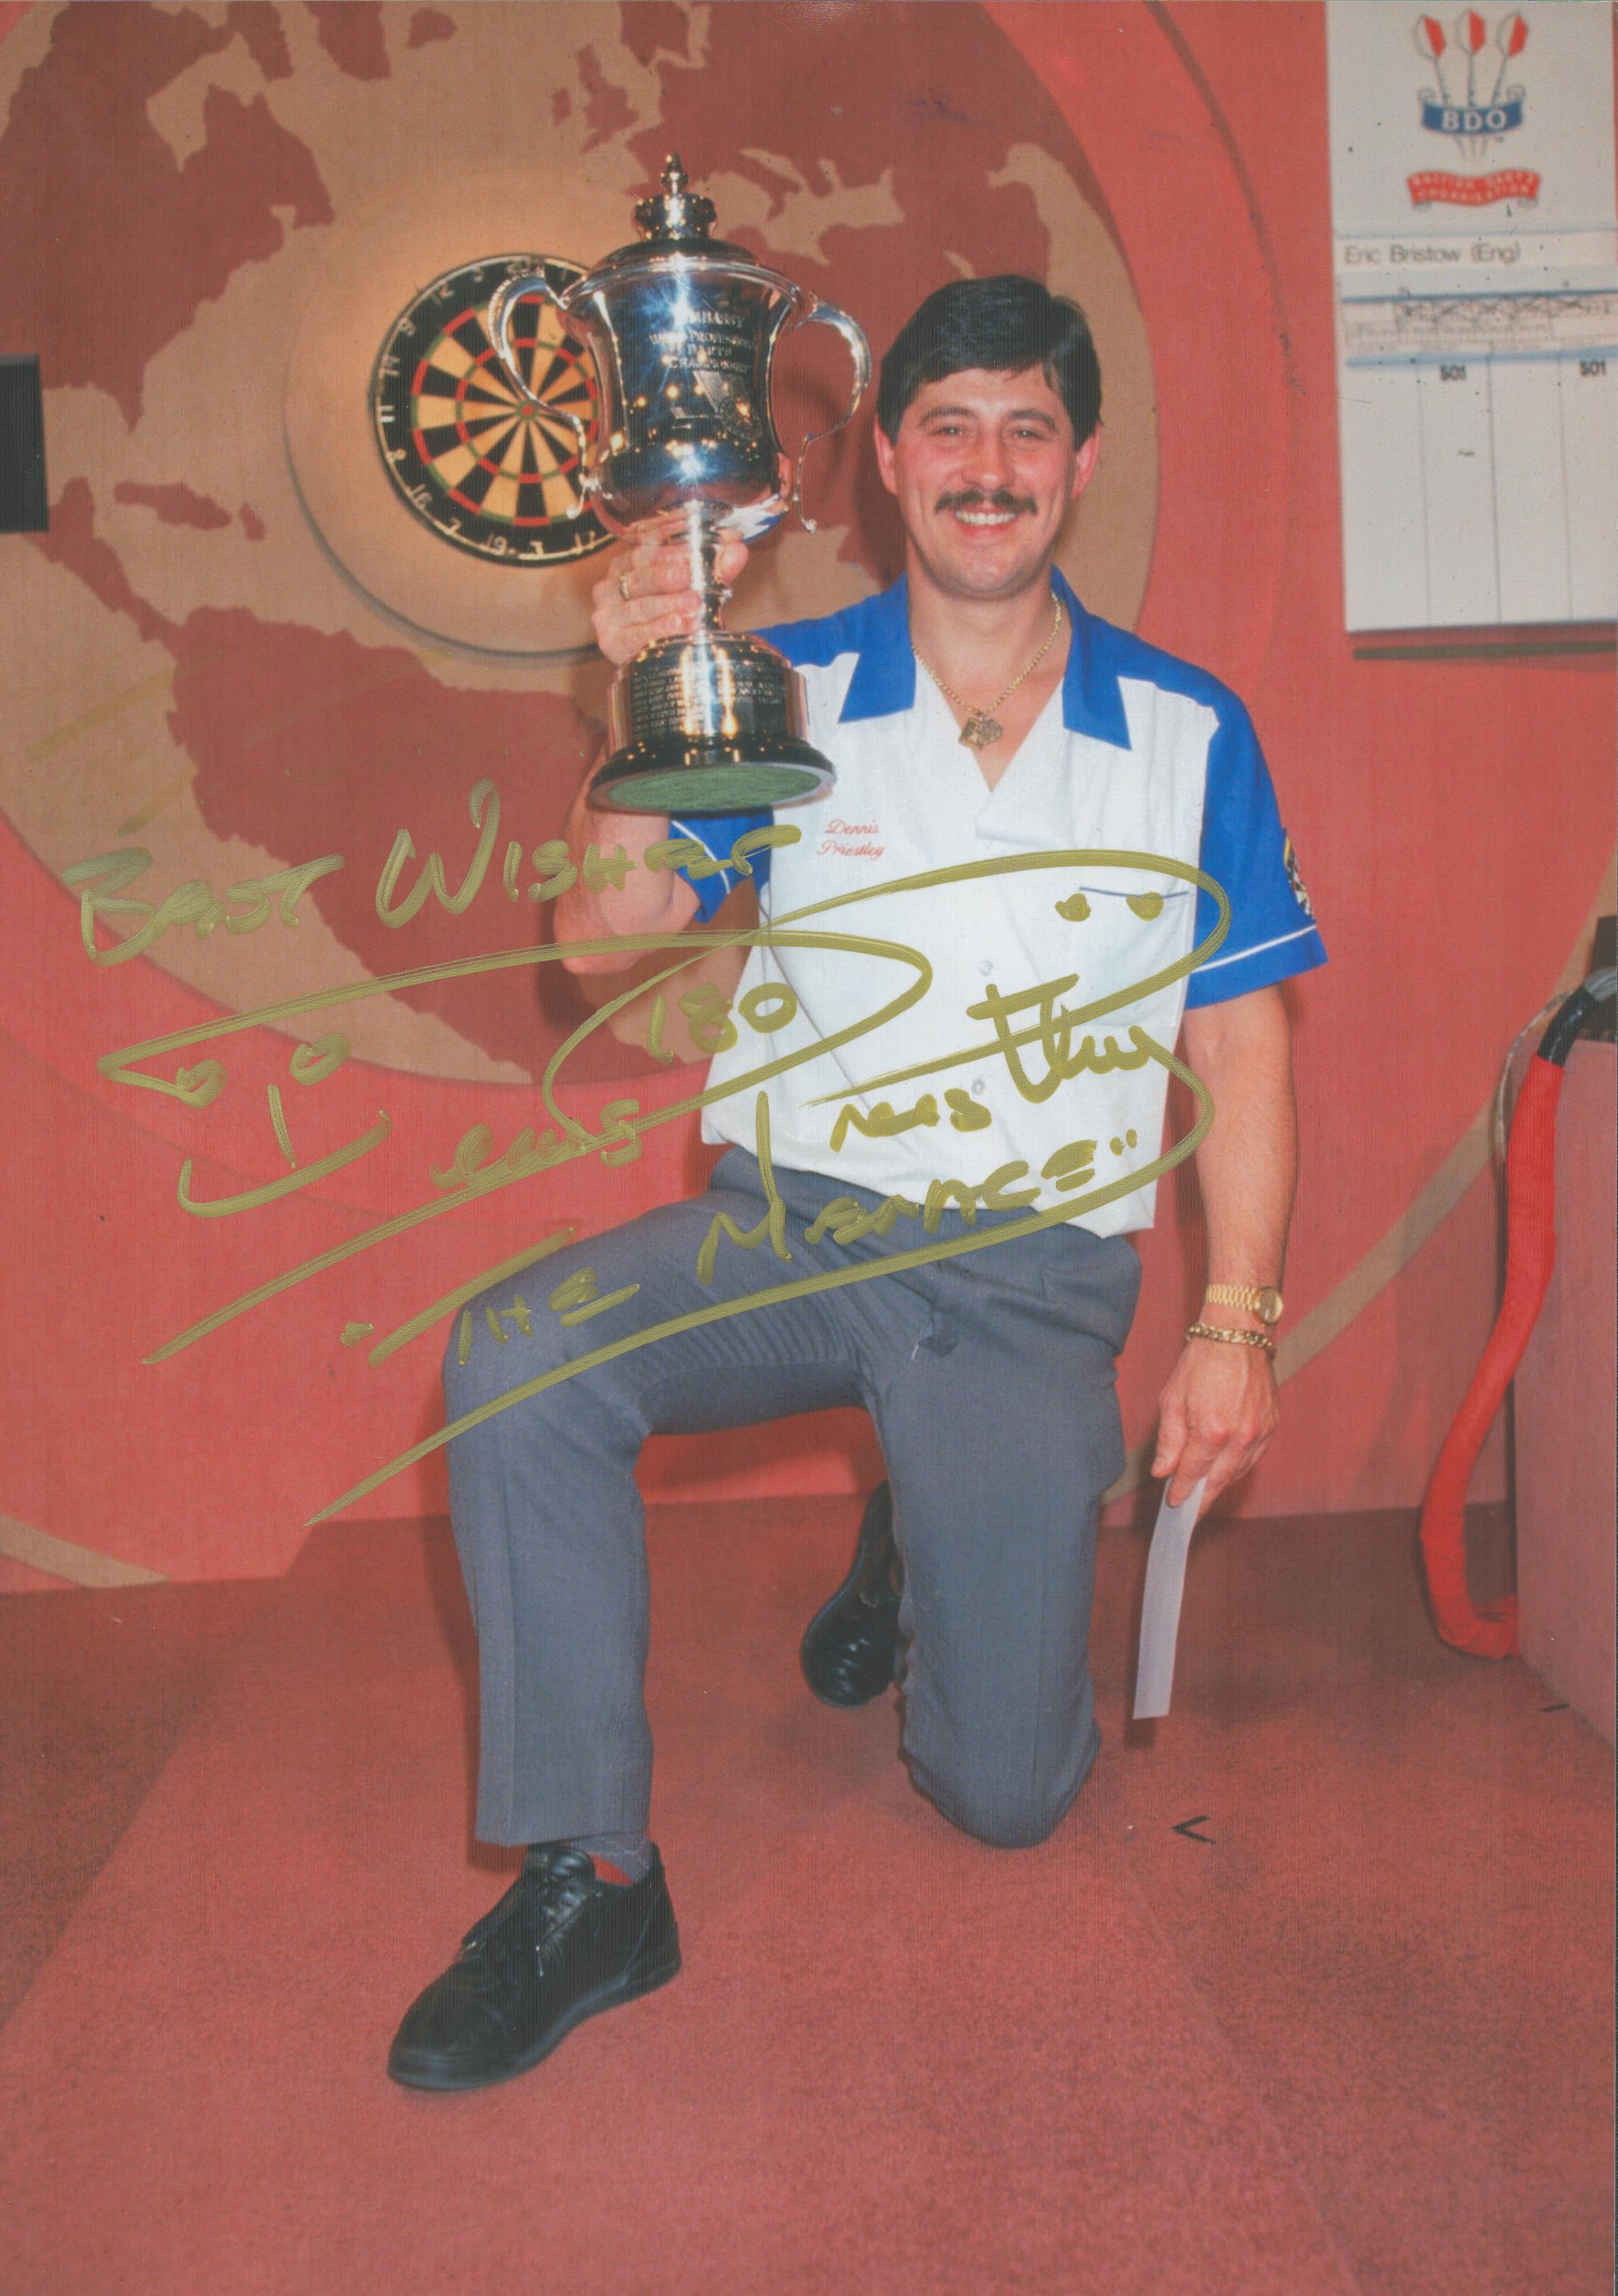 Darts Dennis Priestley Hand signed 10x8 Colour Photo showing Priestley with a Darts Trophy. Signed